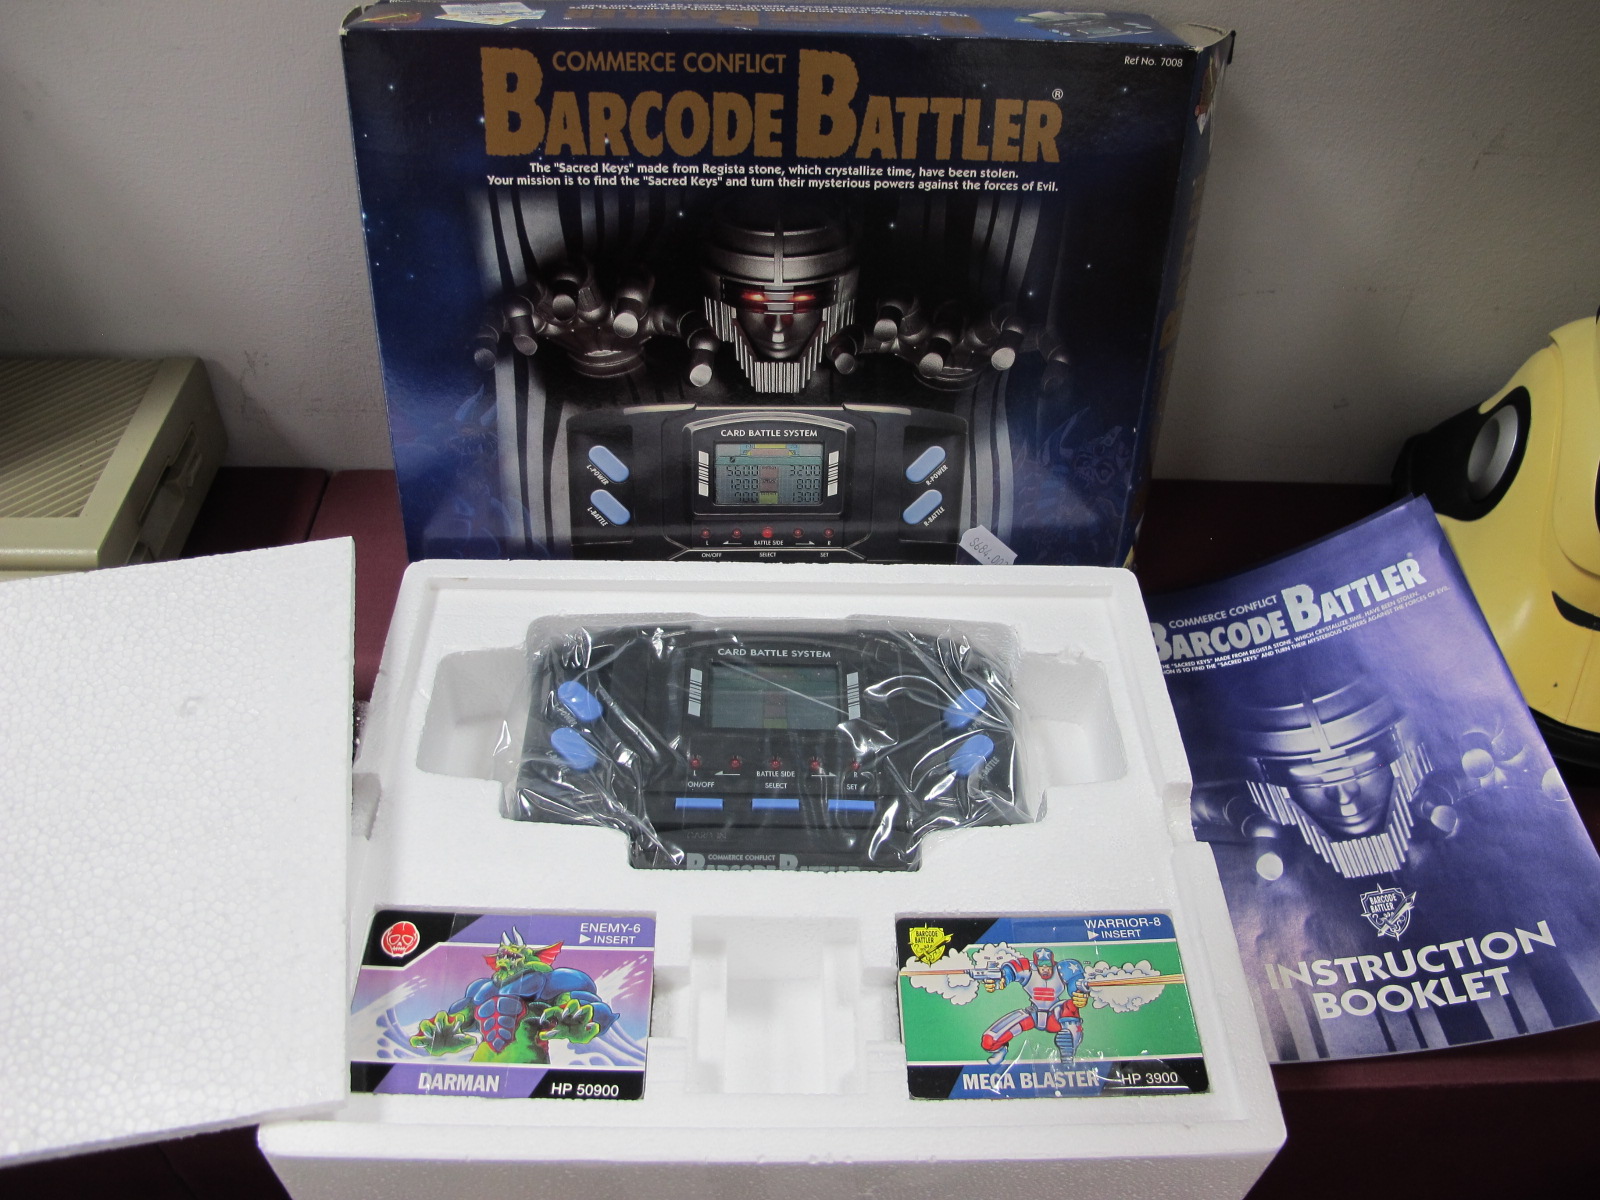 A Commerce Conflict Barcode Battler, by Tomy, appears unused, boxed.